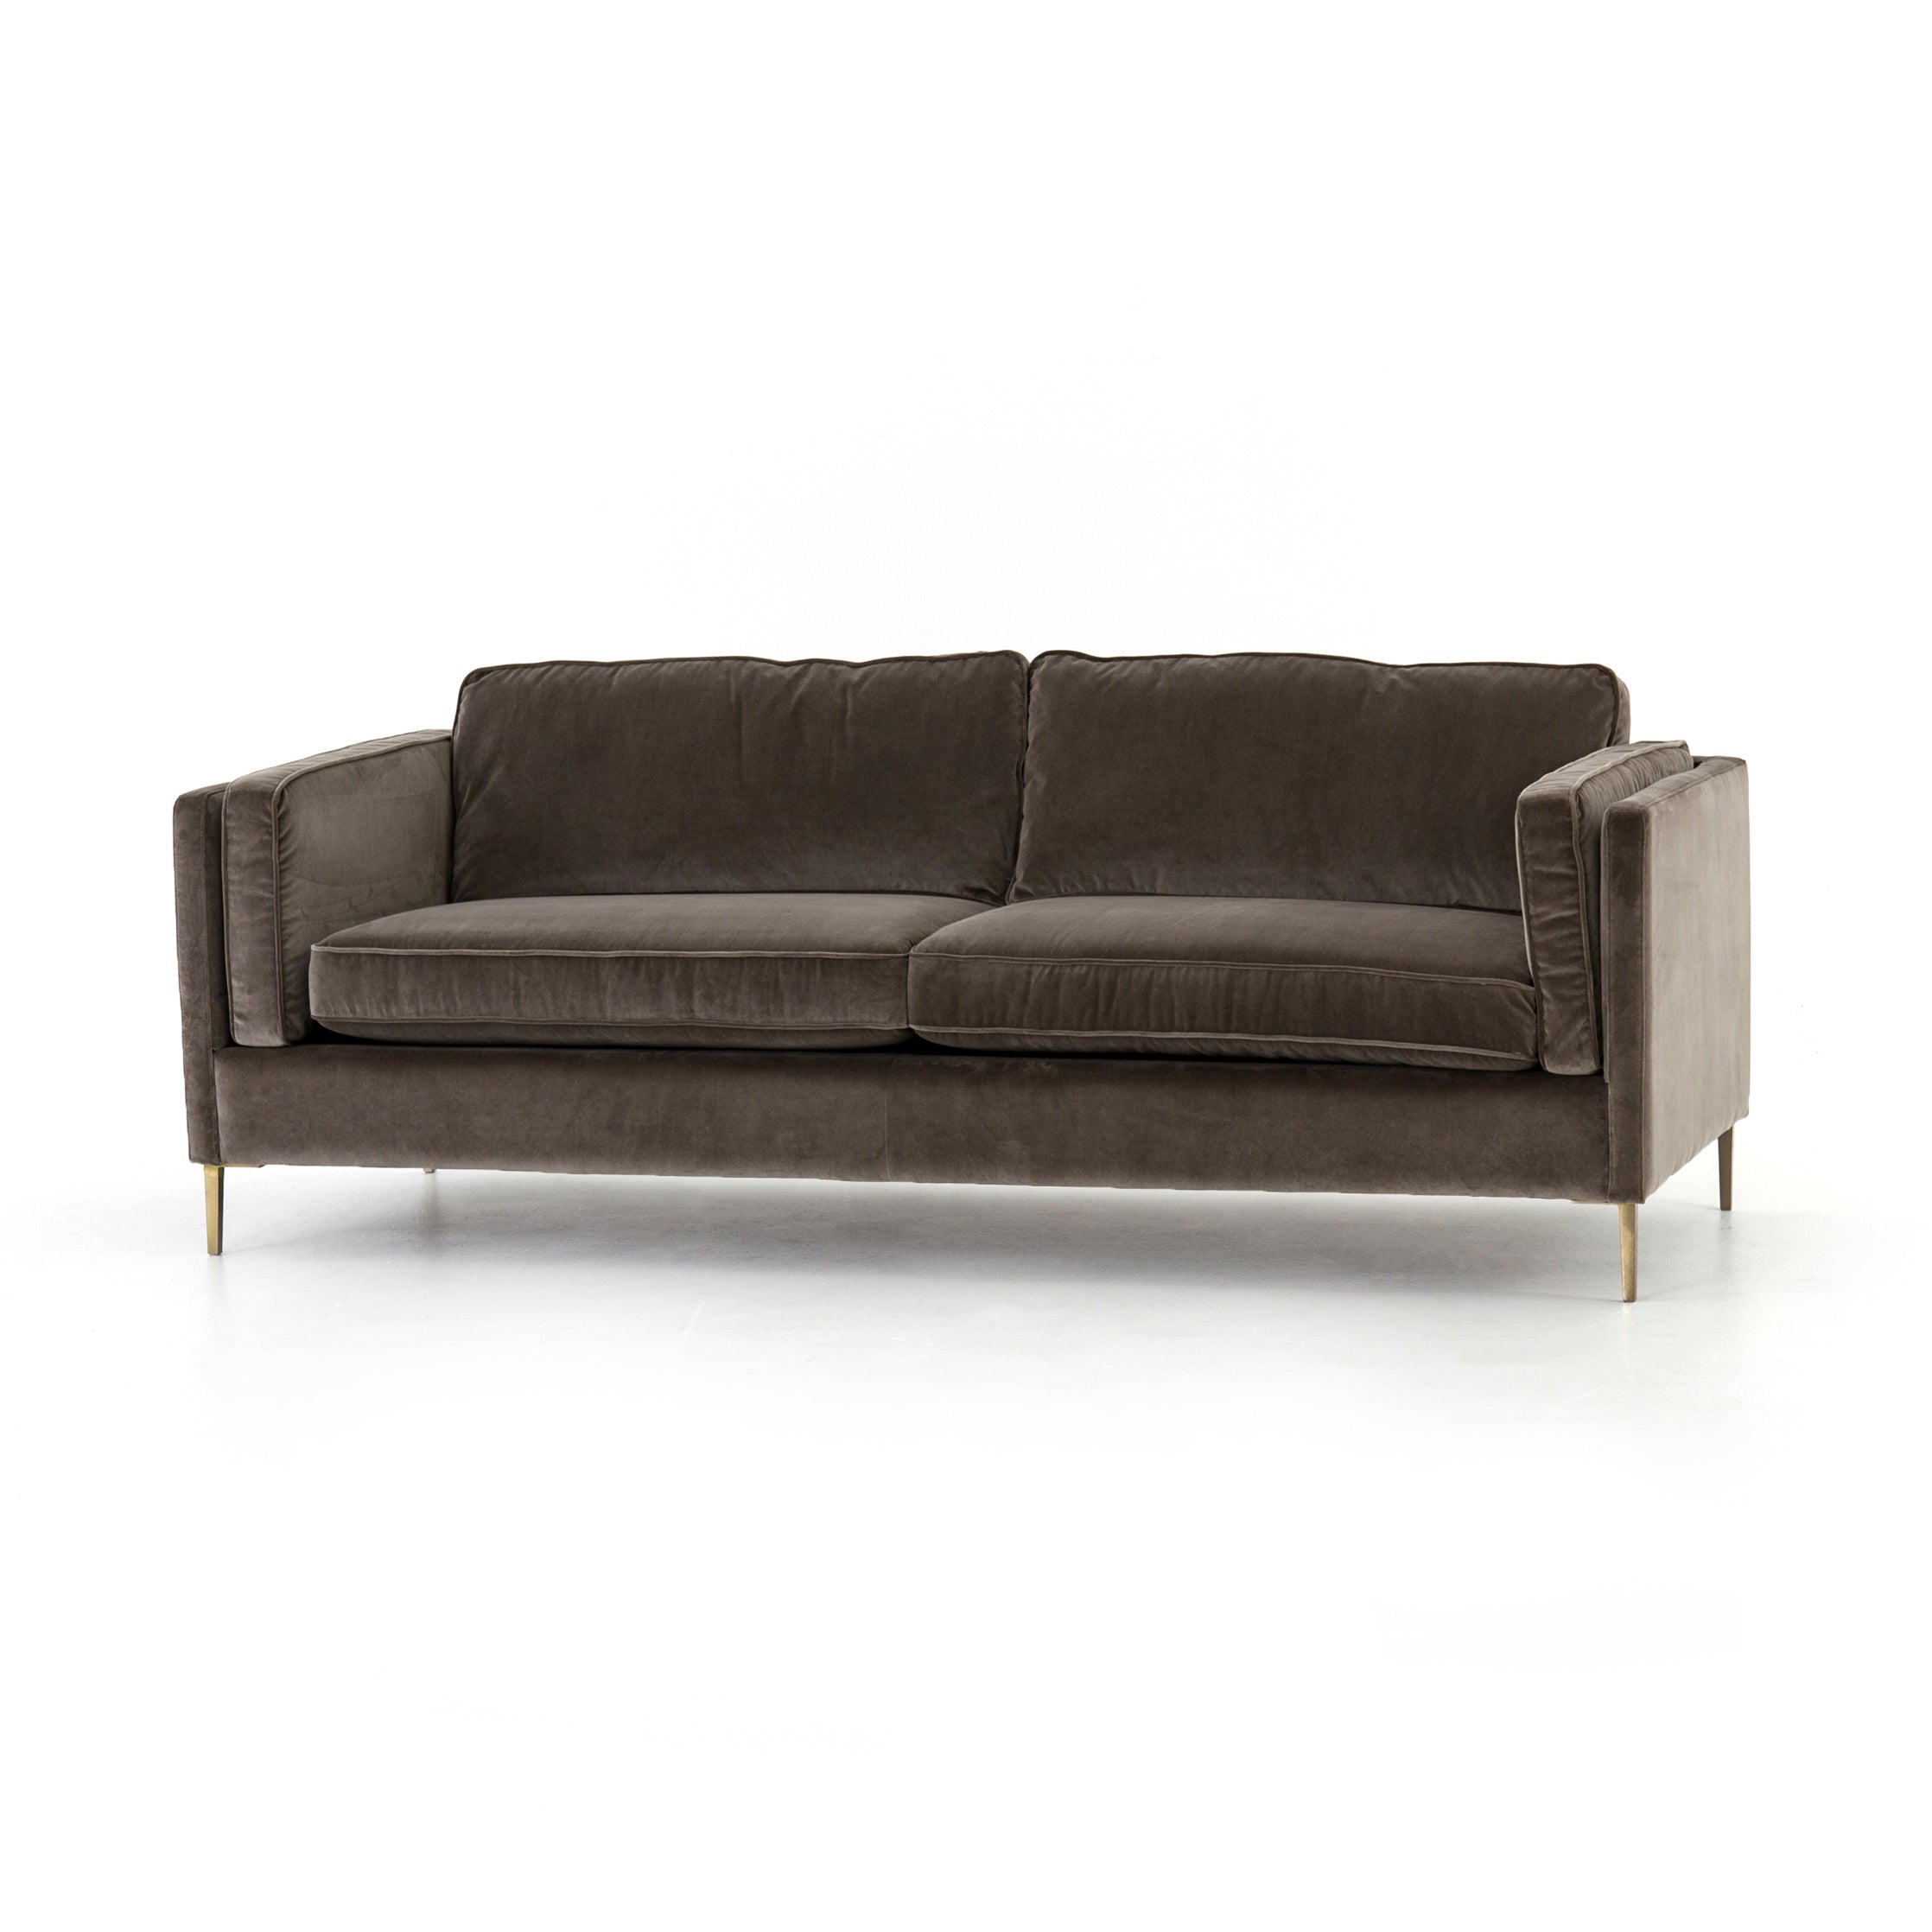 We love the plush brich-grey upholstery of this Emery Sofa - Sapphire Birch. The slim legs are finished in a gorgeous antique brass, for a sophisticated look for any living room or lounge area.   Overall Dimensions: 84.00"w x 36.00"d x 33.00"h